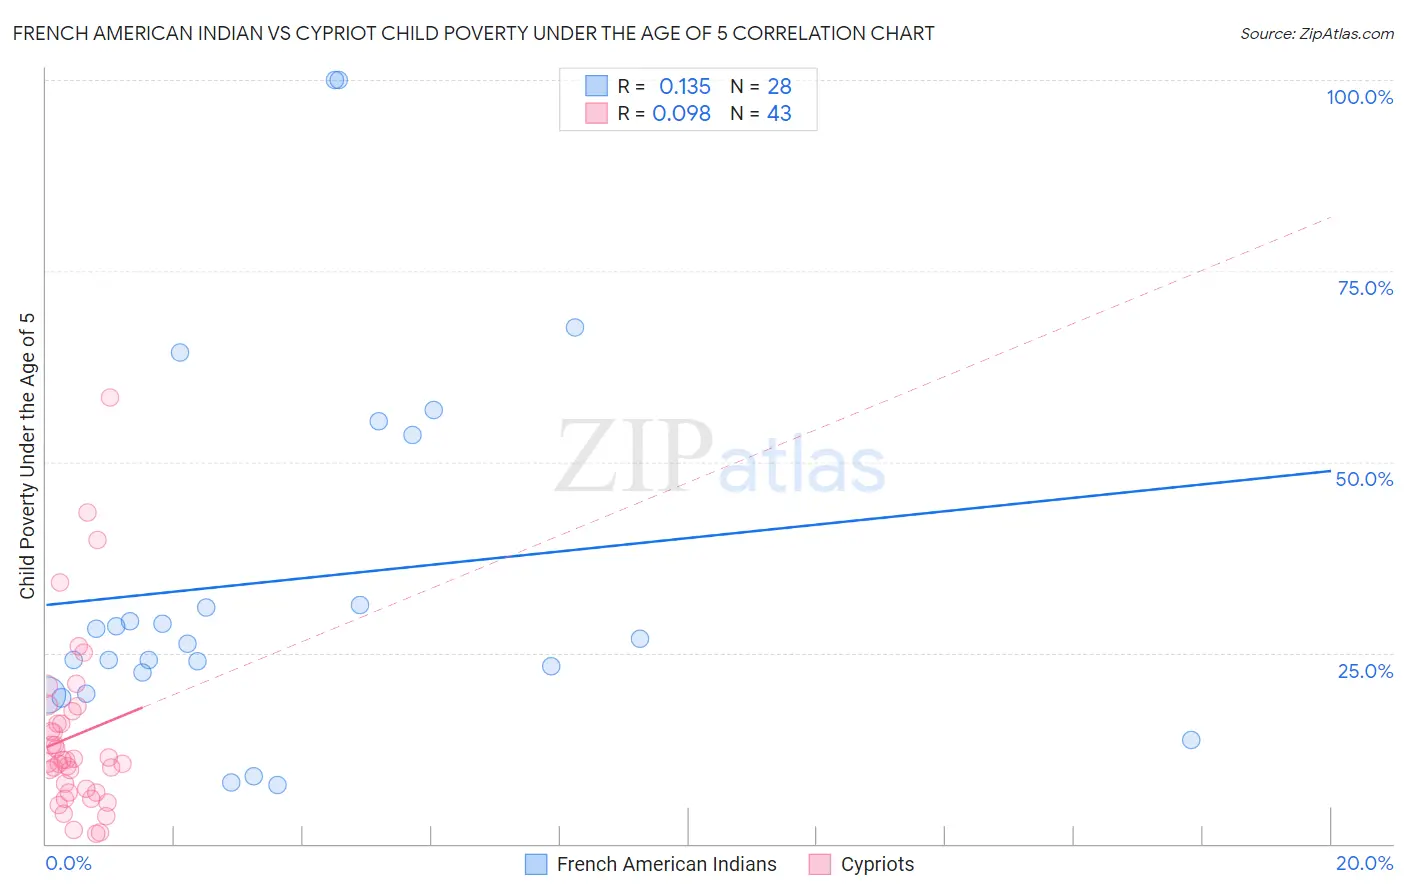 French American Indian vs Cypriot Child Poverty Under the Age of 5